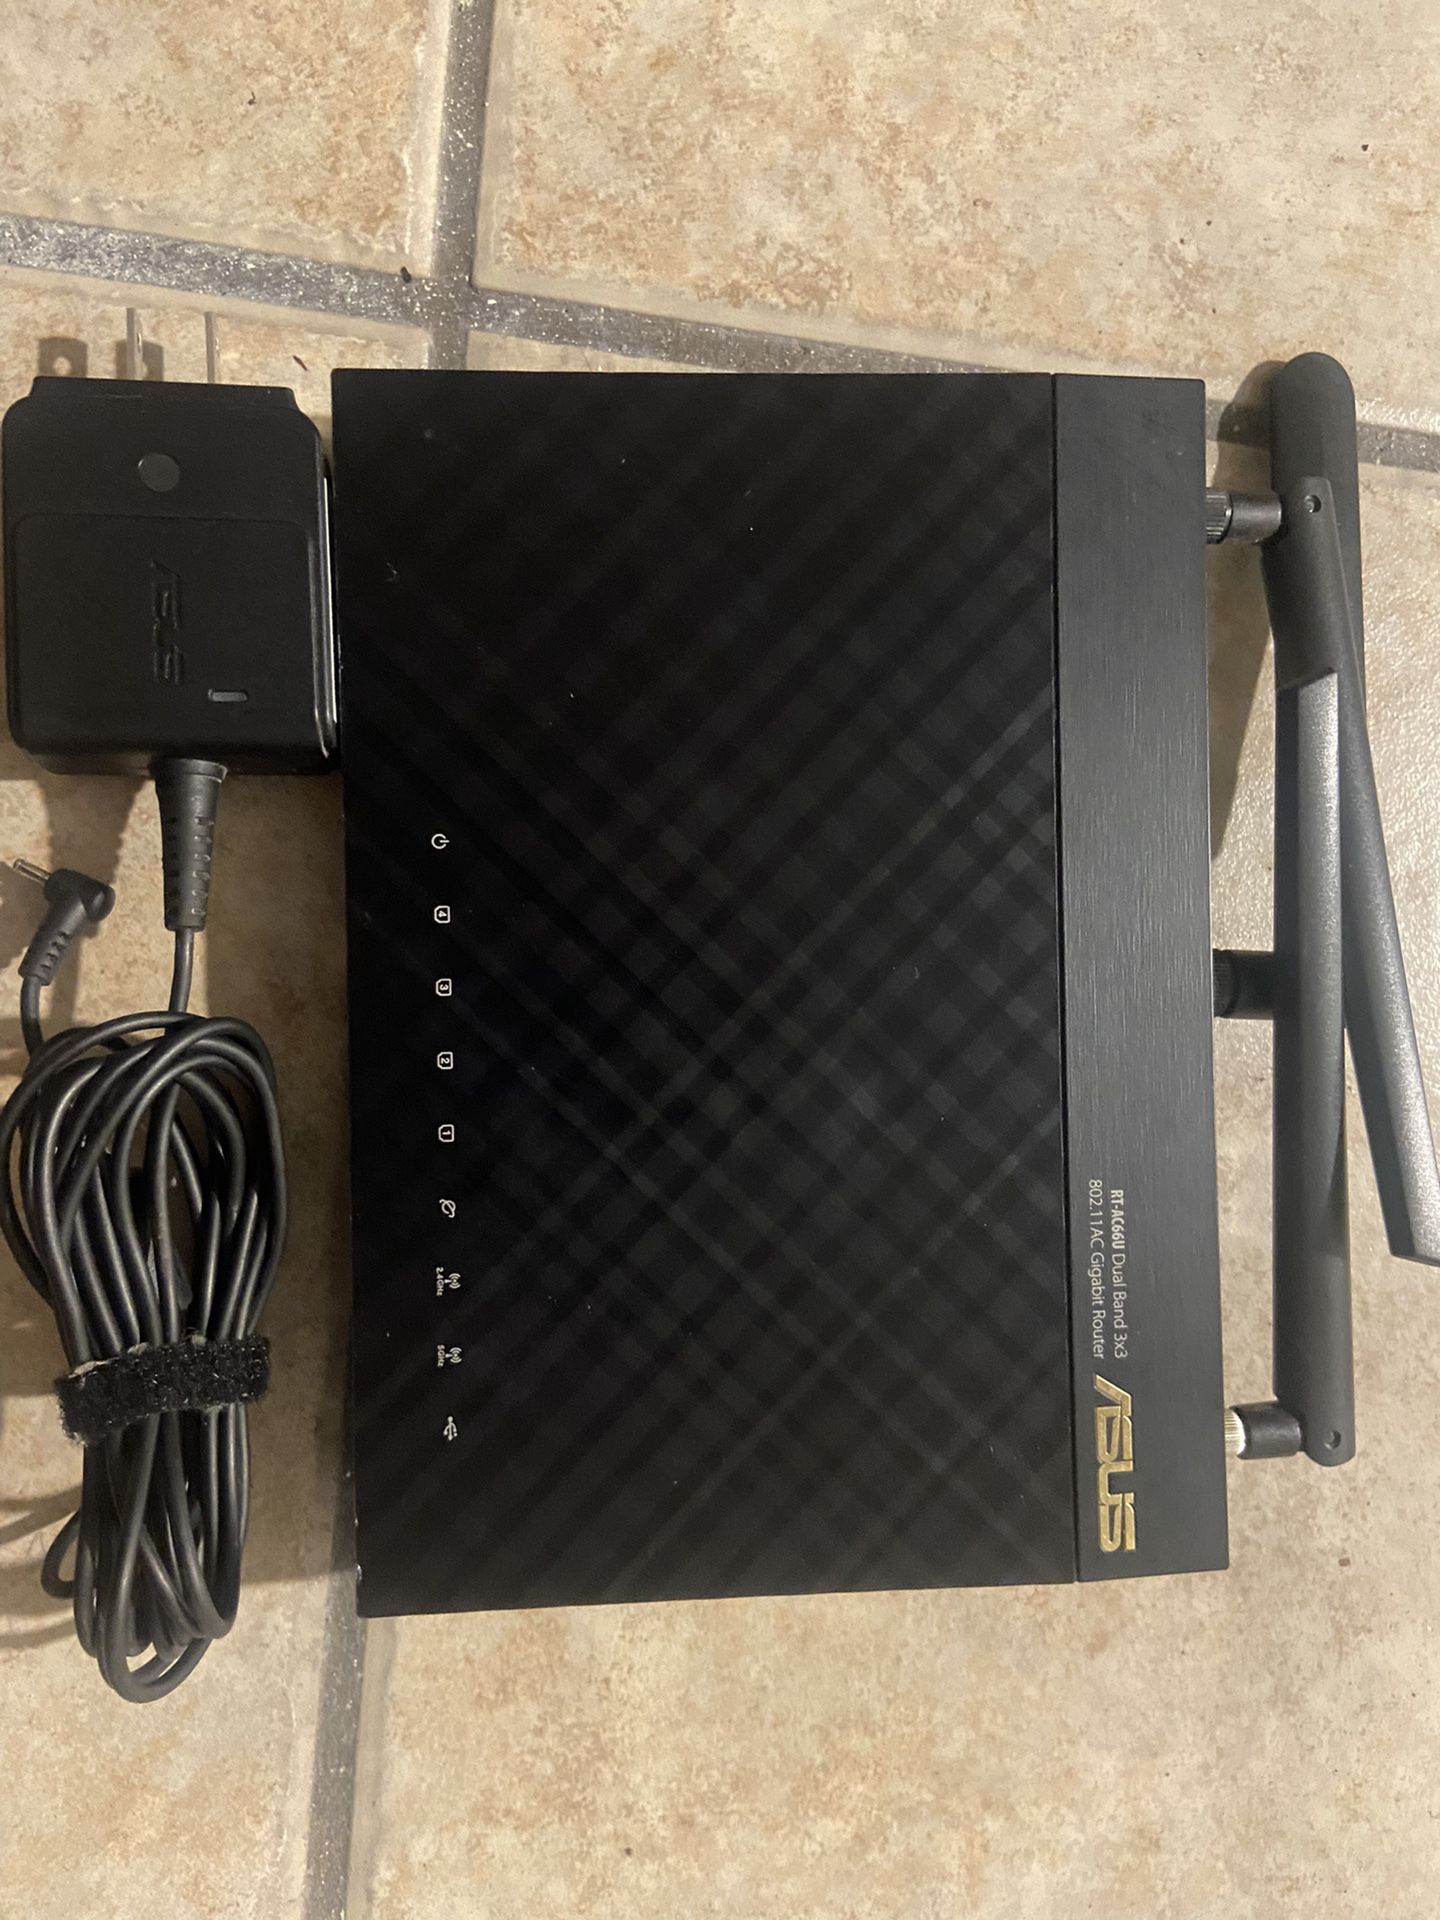 Asus Ac66u Router Used Good Condition